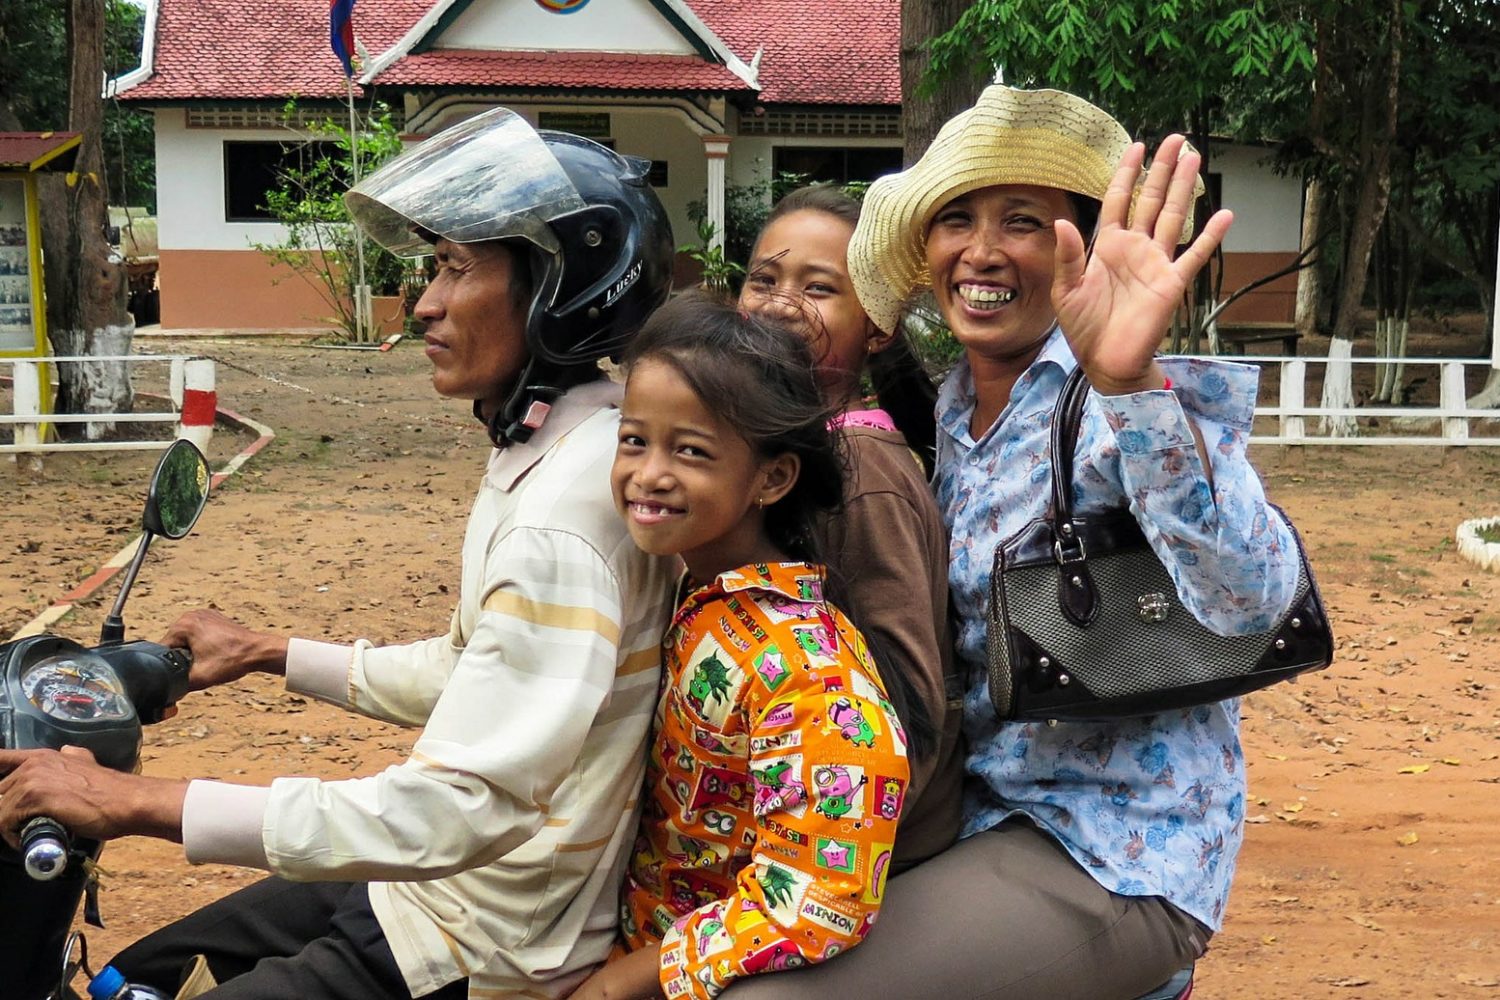 Passing by friendly localas in Siem Reap